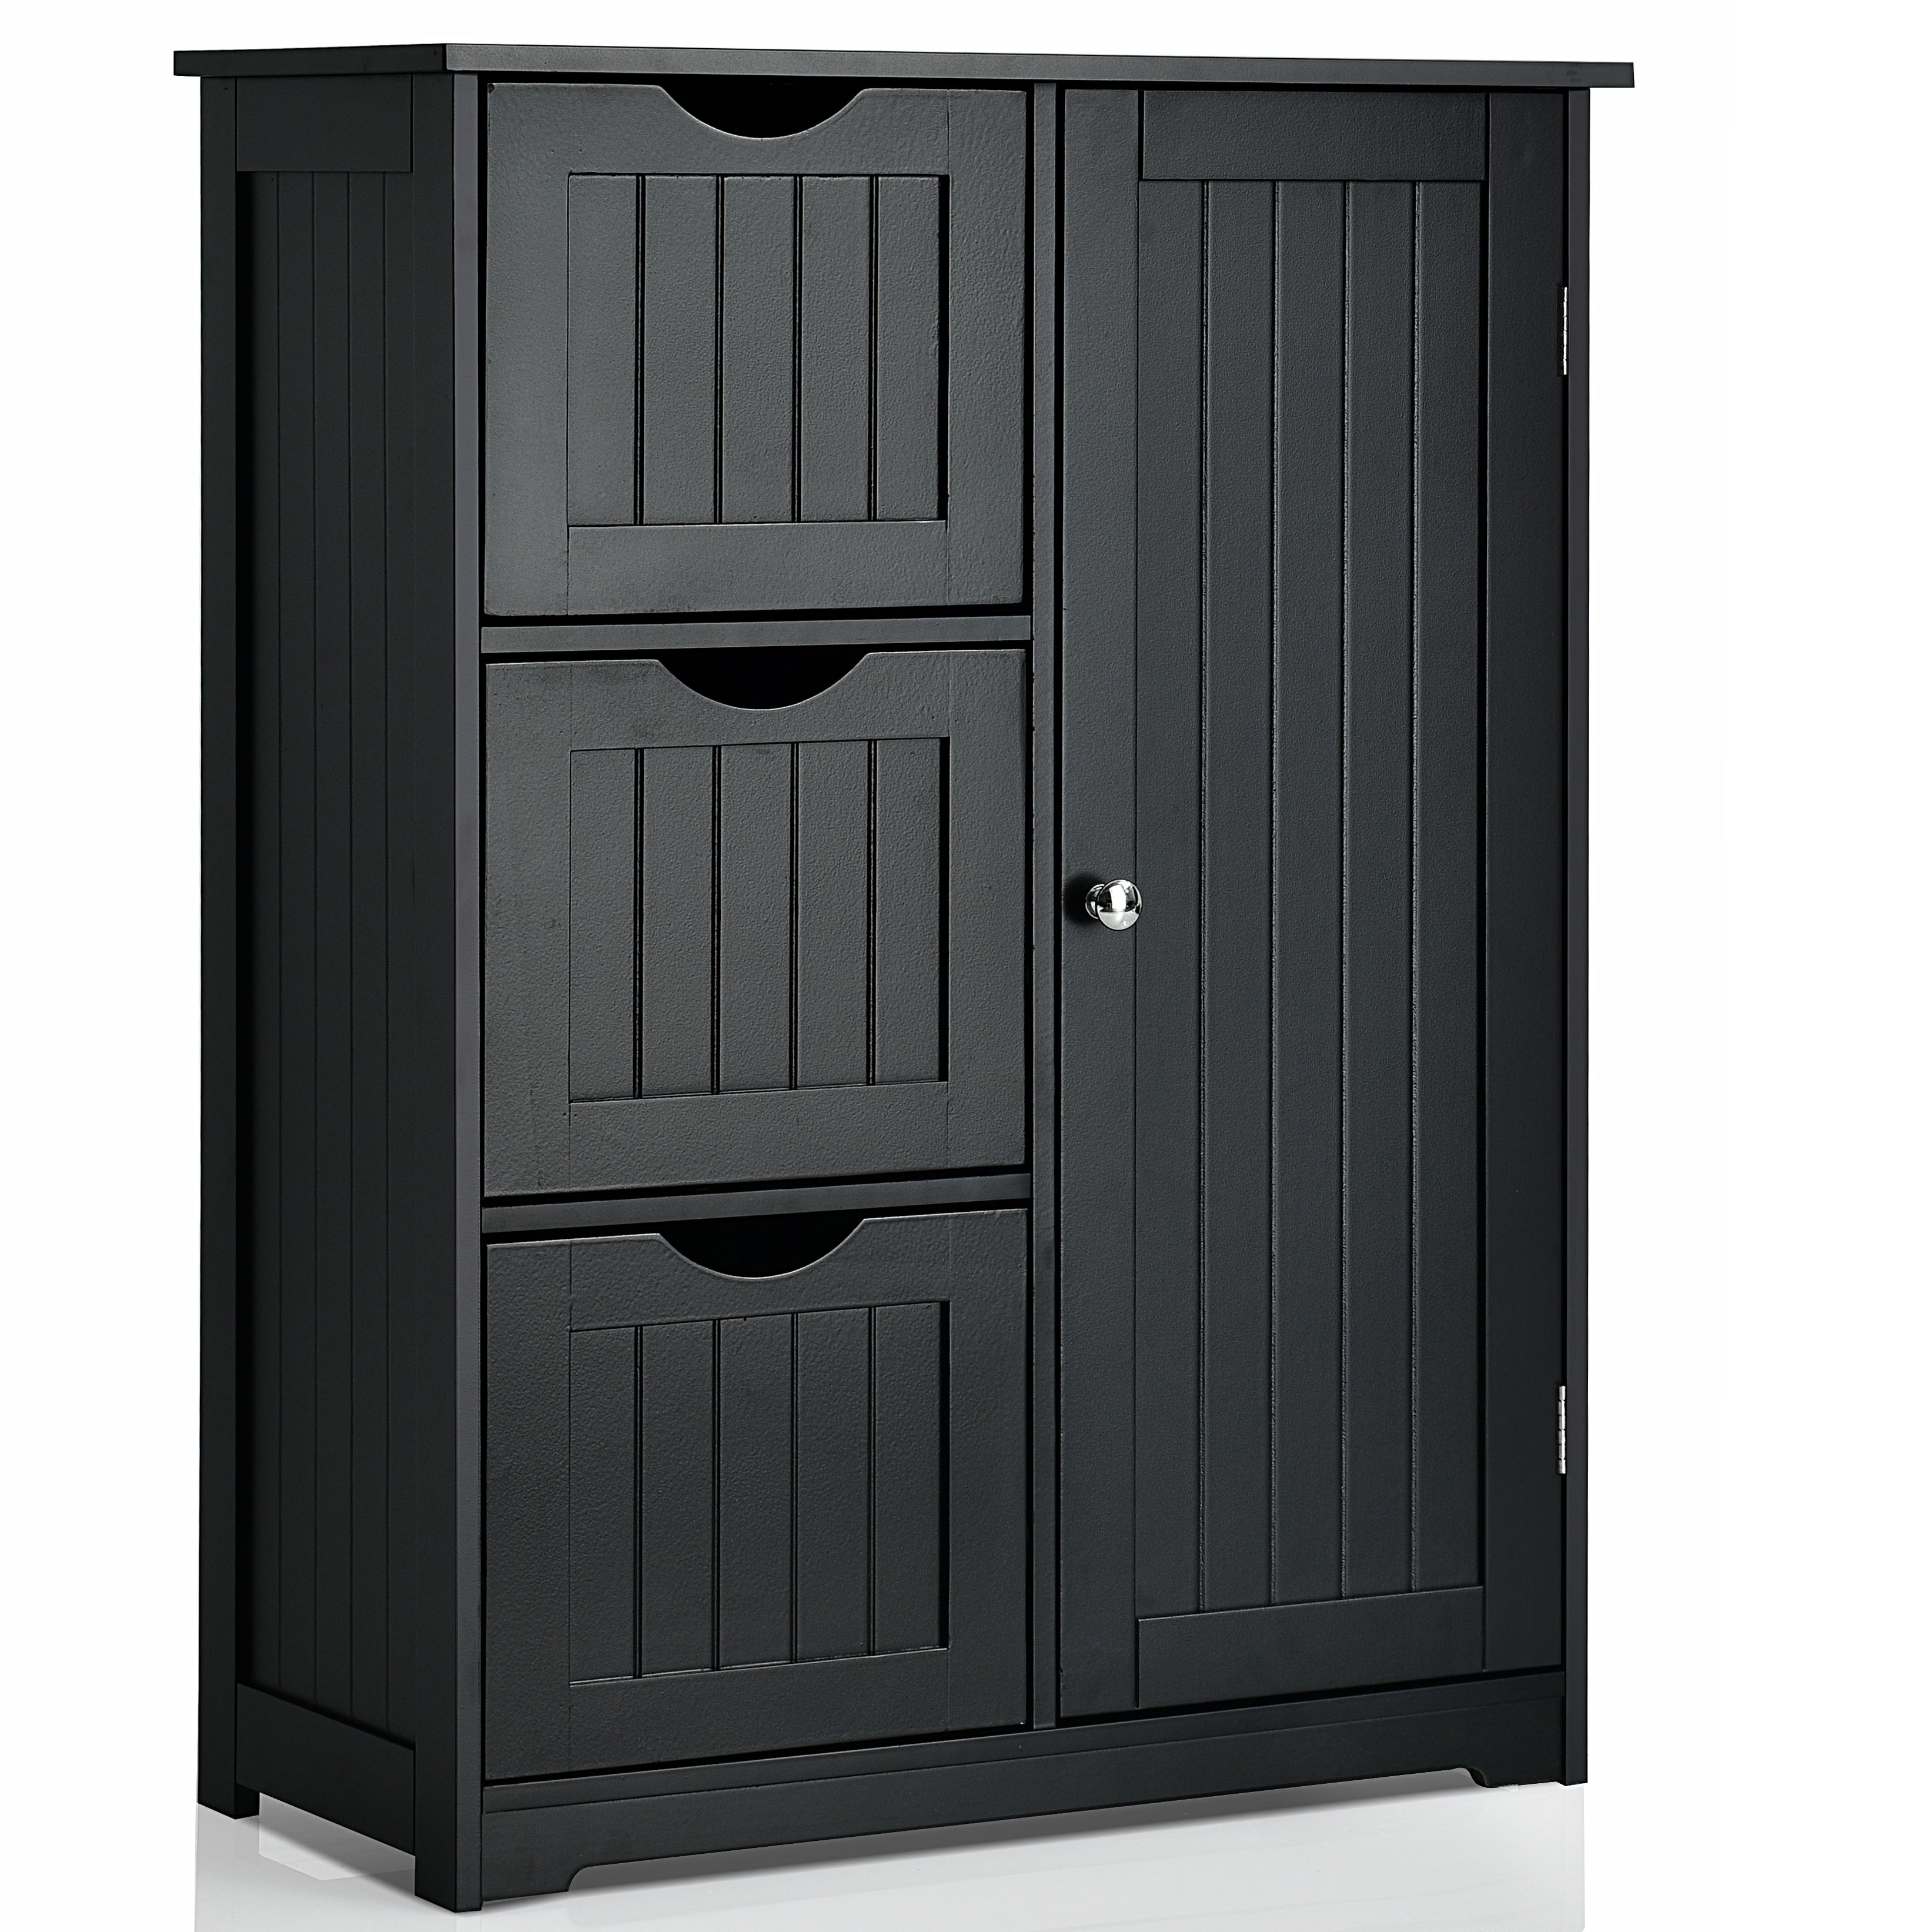 

Giantex Bathroom Floor Cabinet Side Storage Cabinet With 3 Drawers And 1 Cupboard Black